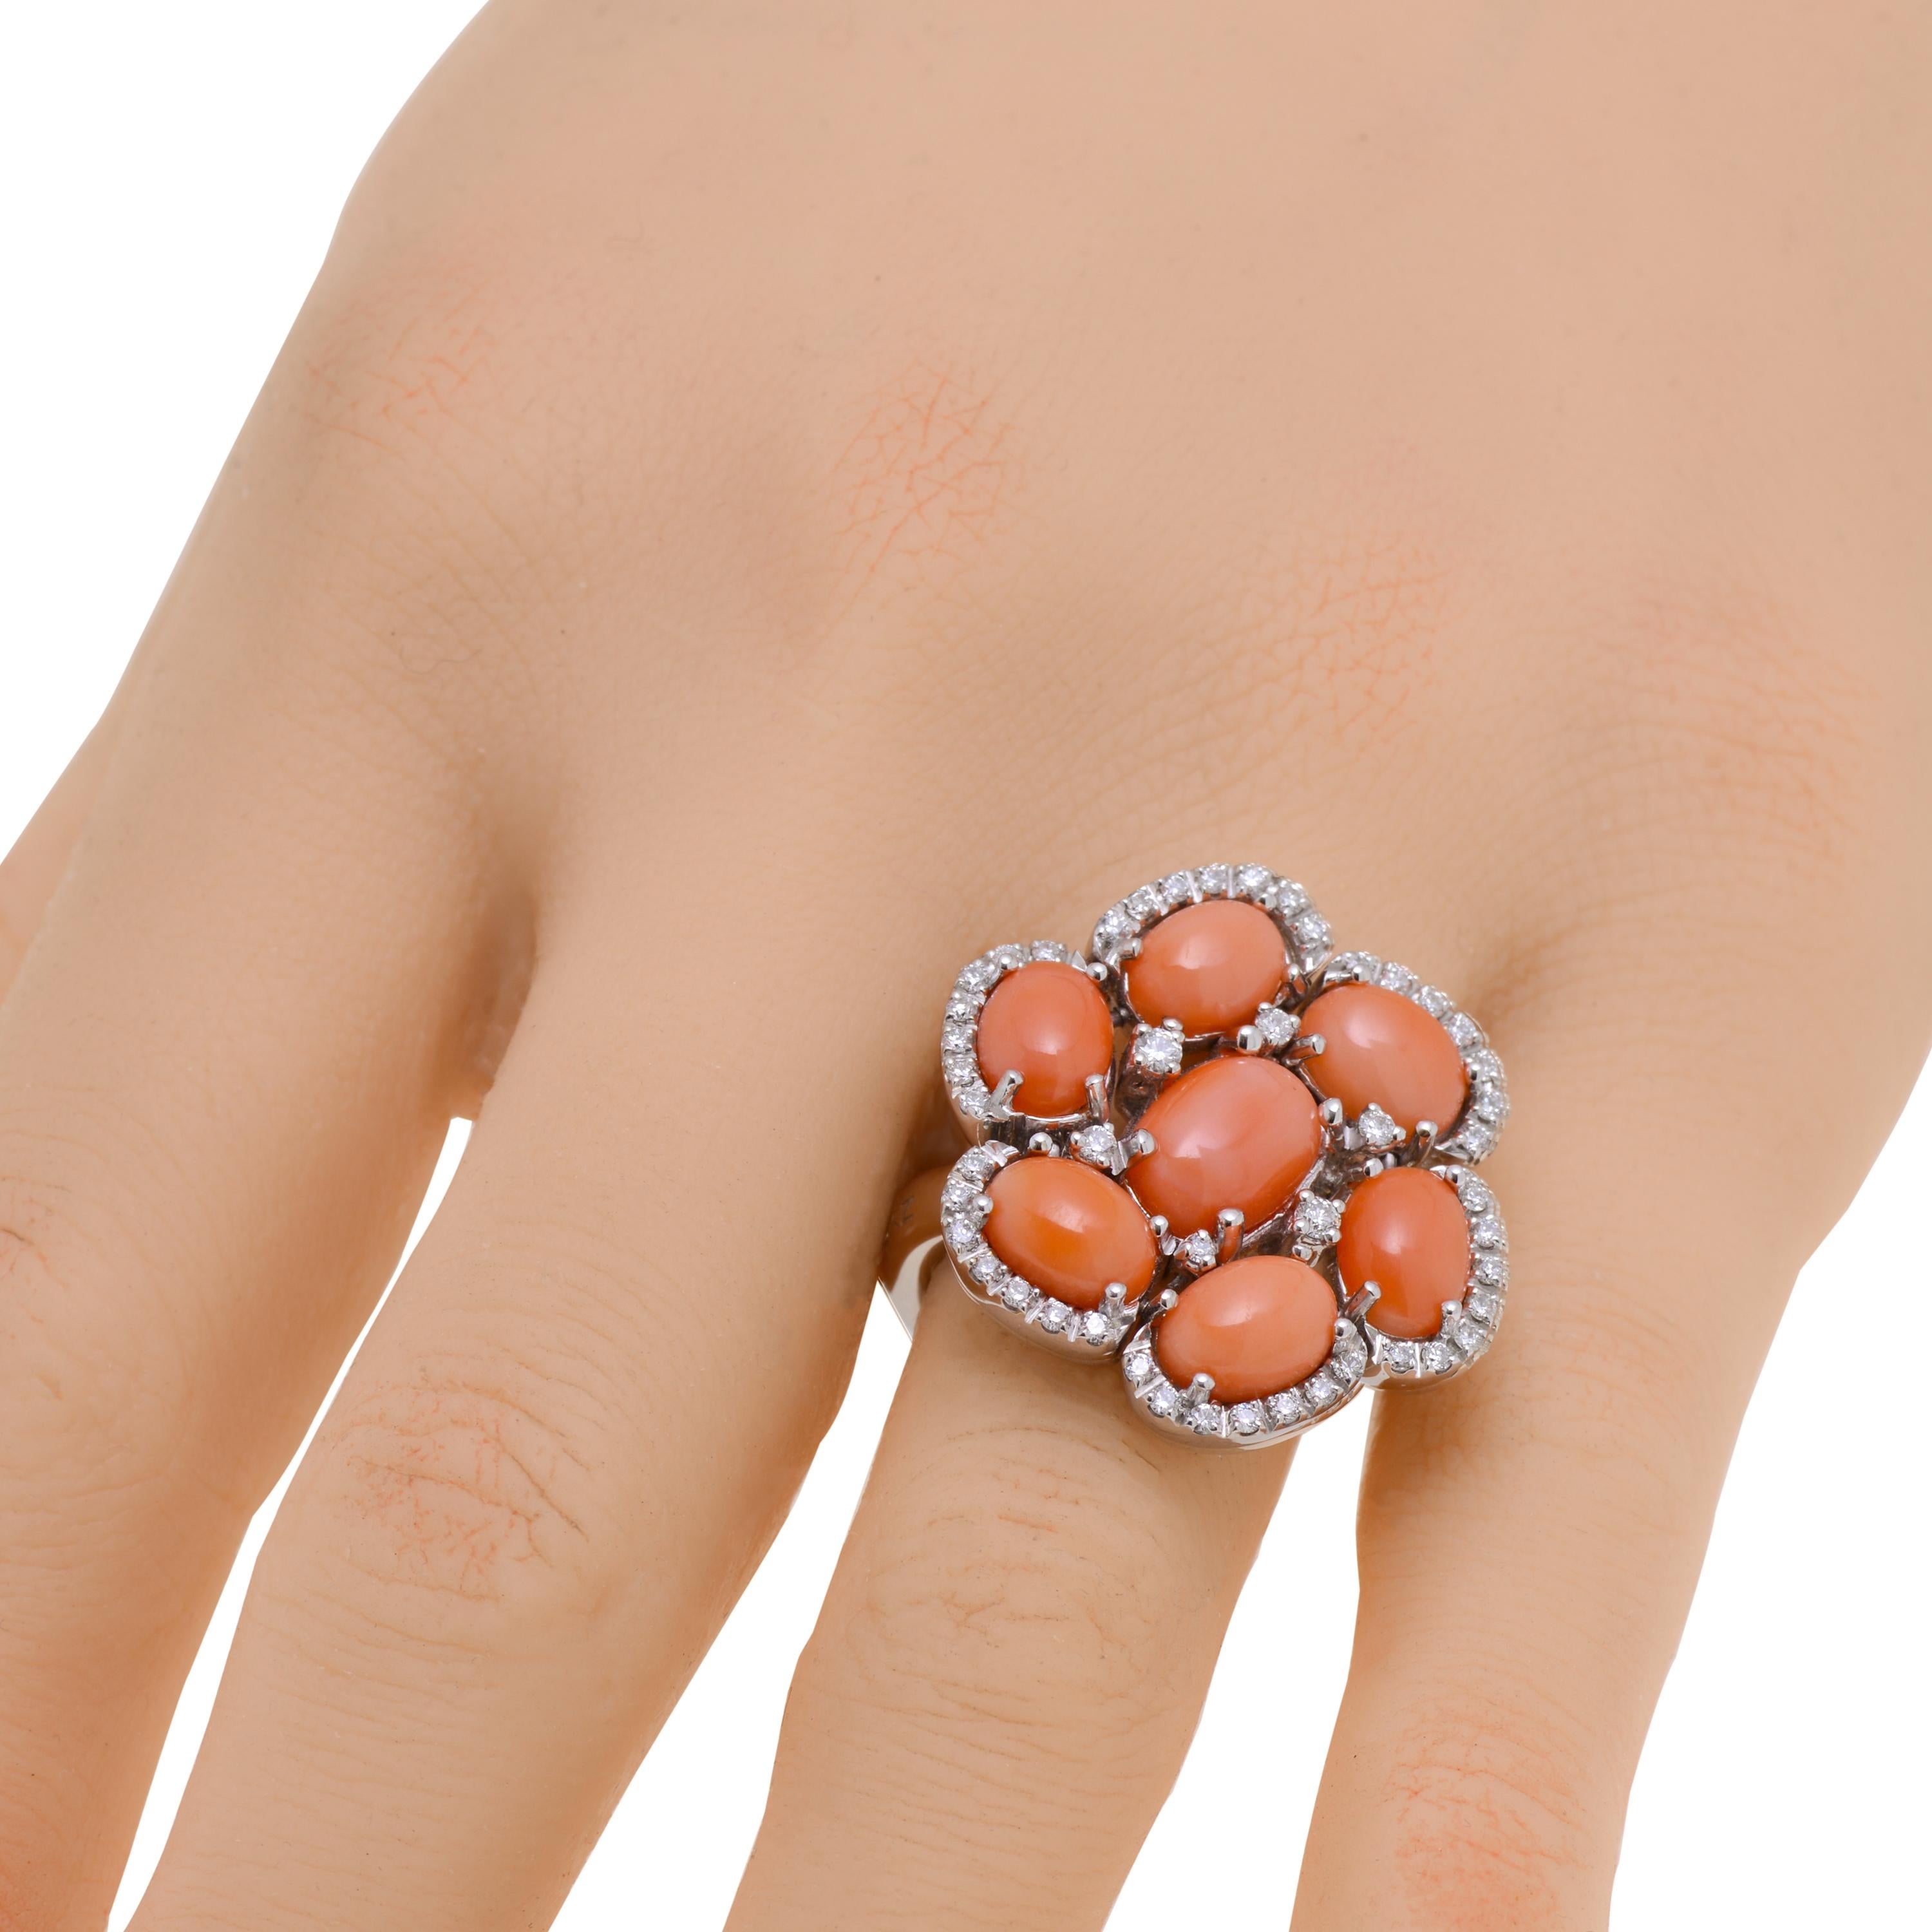 This playful Zydo 18K White Gold Statement Ring features seven festive Coral petals (3.66ct tw) accented with glimmering accent diamonds and pave (0.5ct twd). Sticking to company traditions since its' foundation, Zydo Jewelry uses only the finest